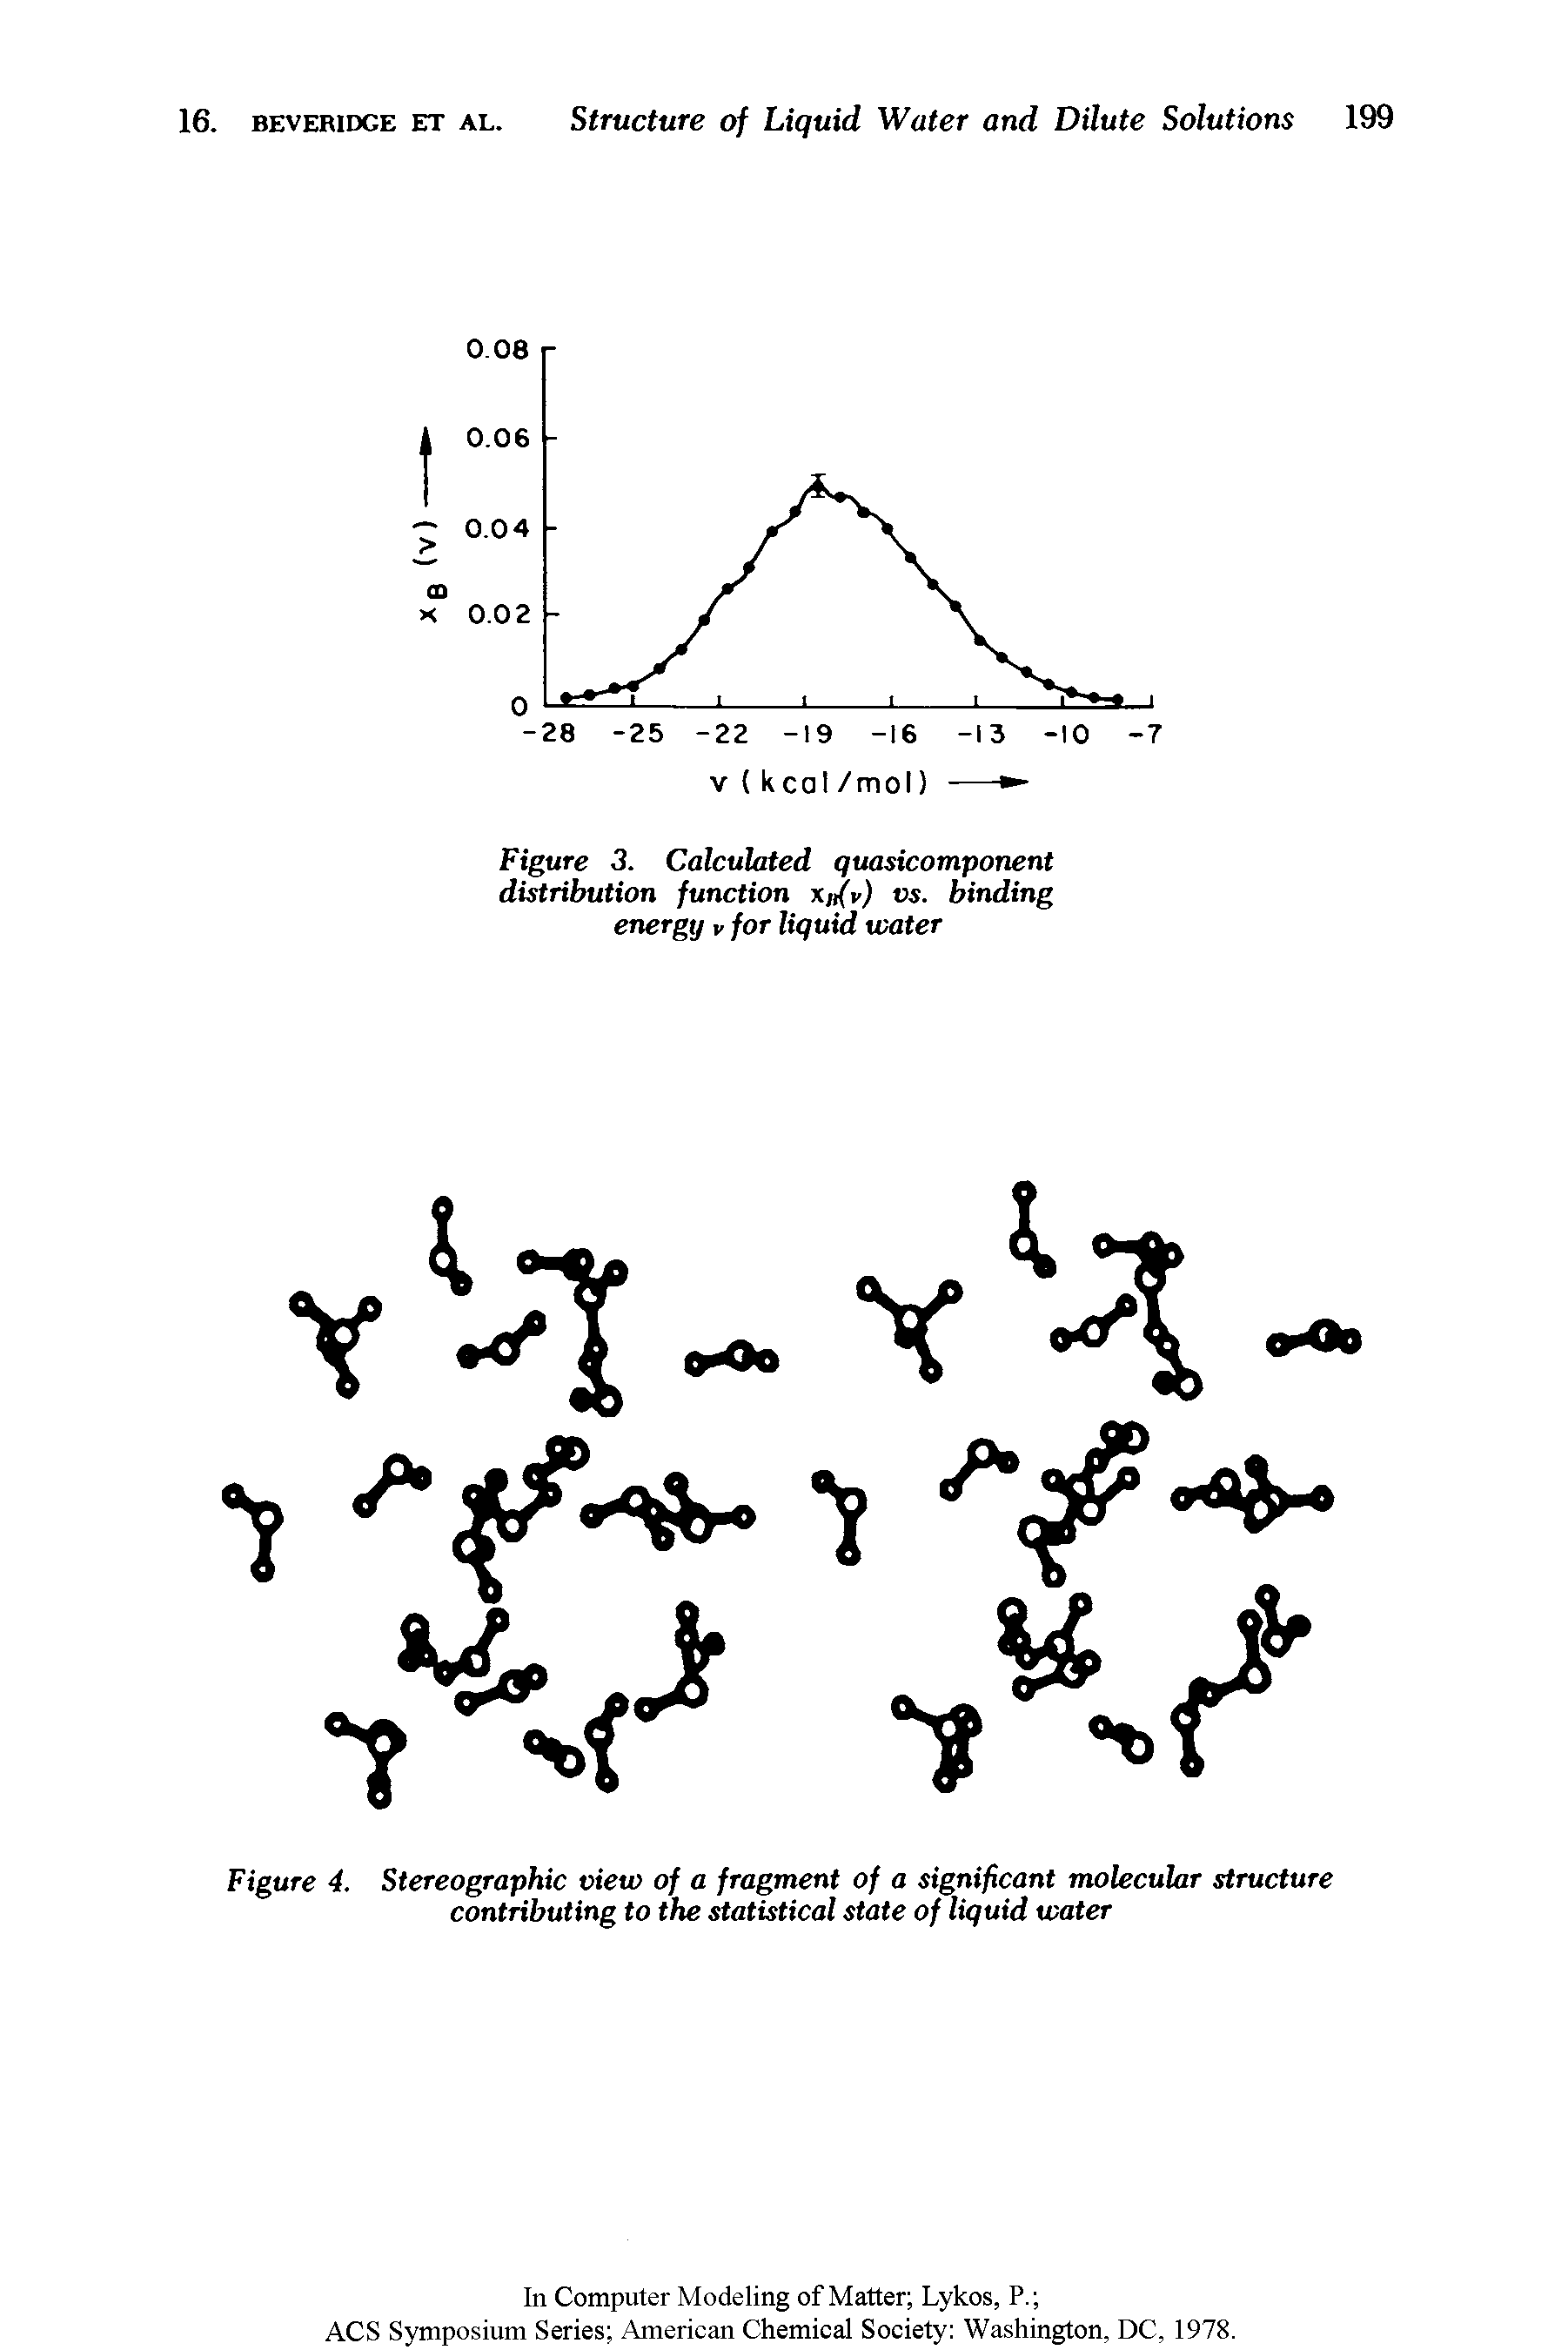 Figure 3. Calculated quasicomponent distribution function xn(r) vs. binding energy v for liquid xcater...